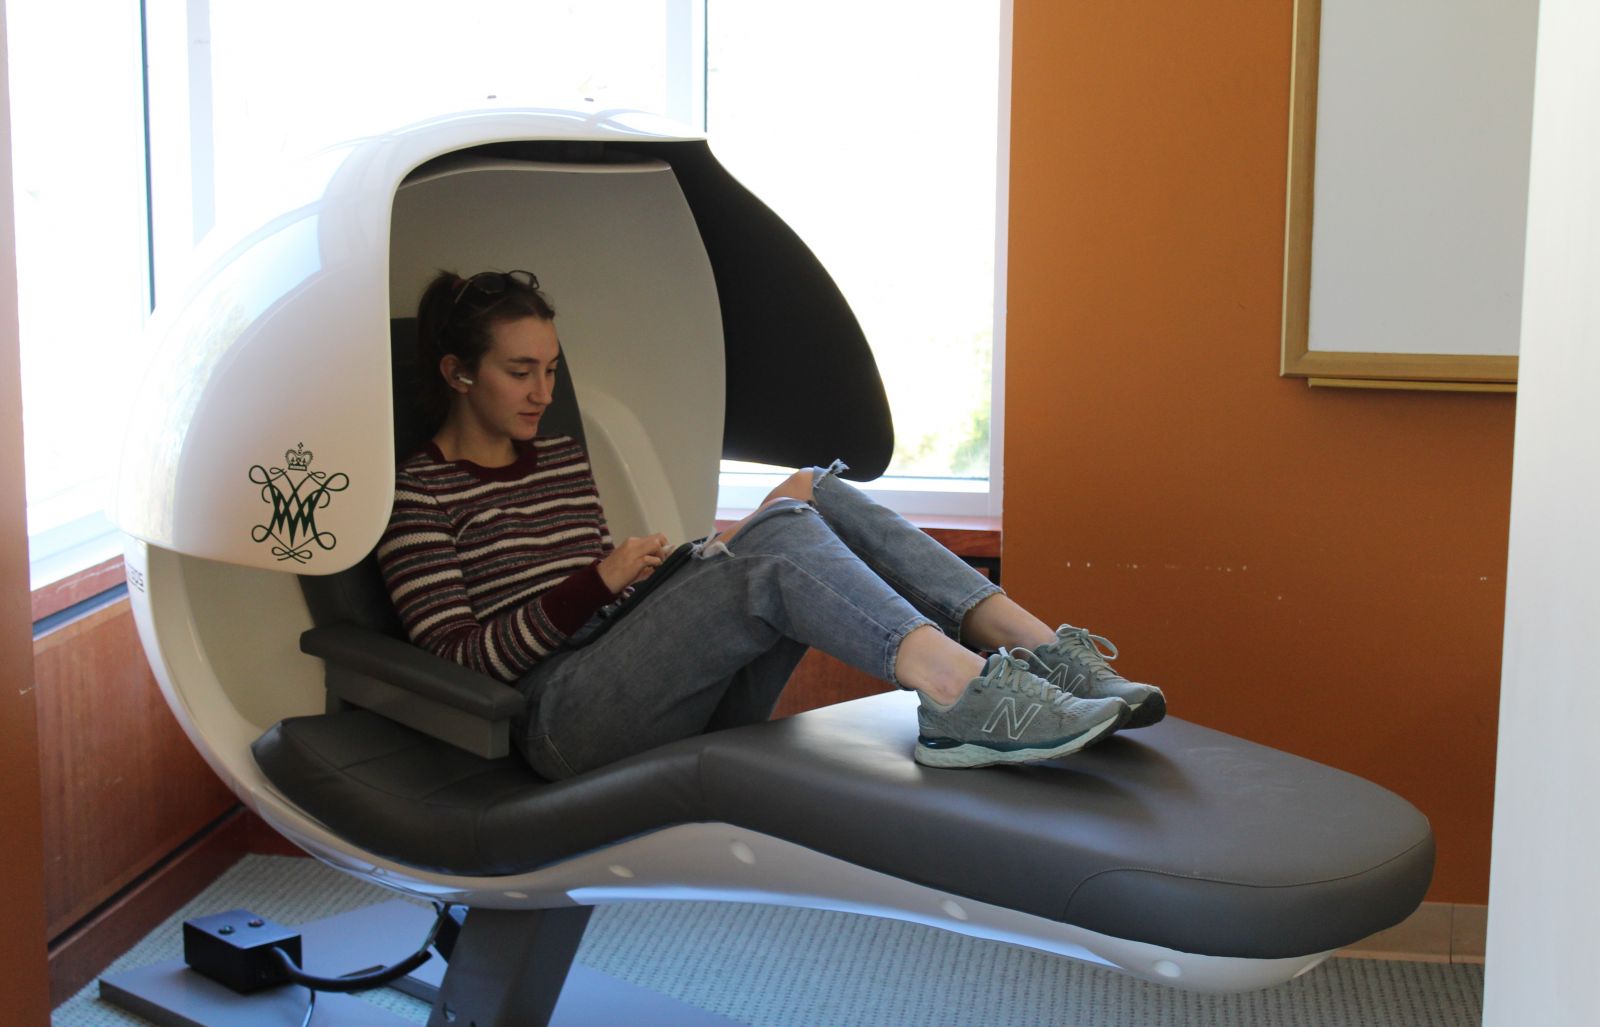 Student sitting in energy pod